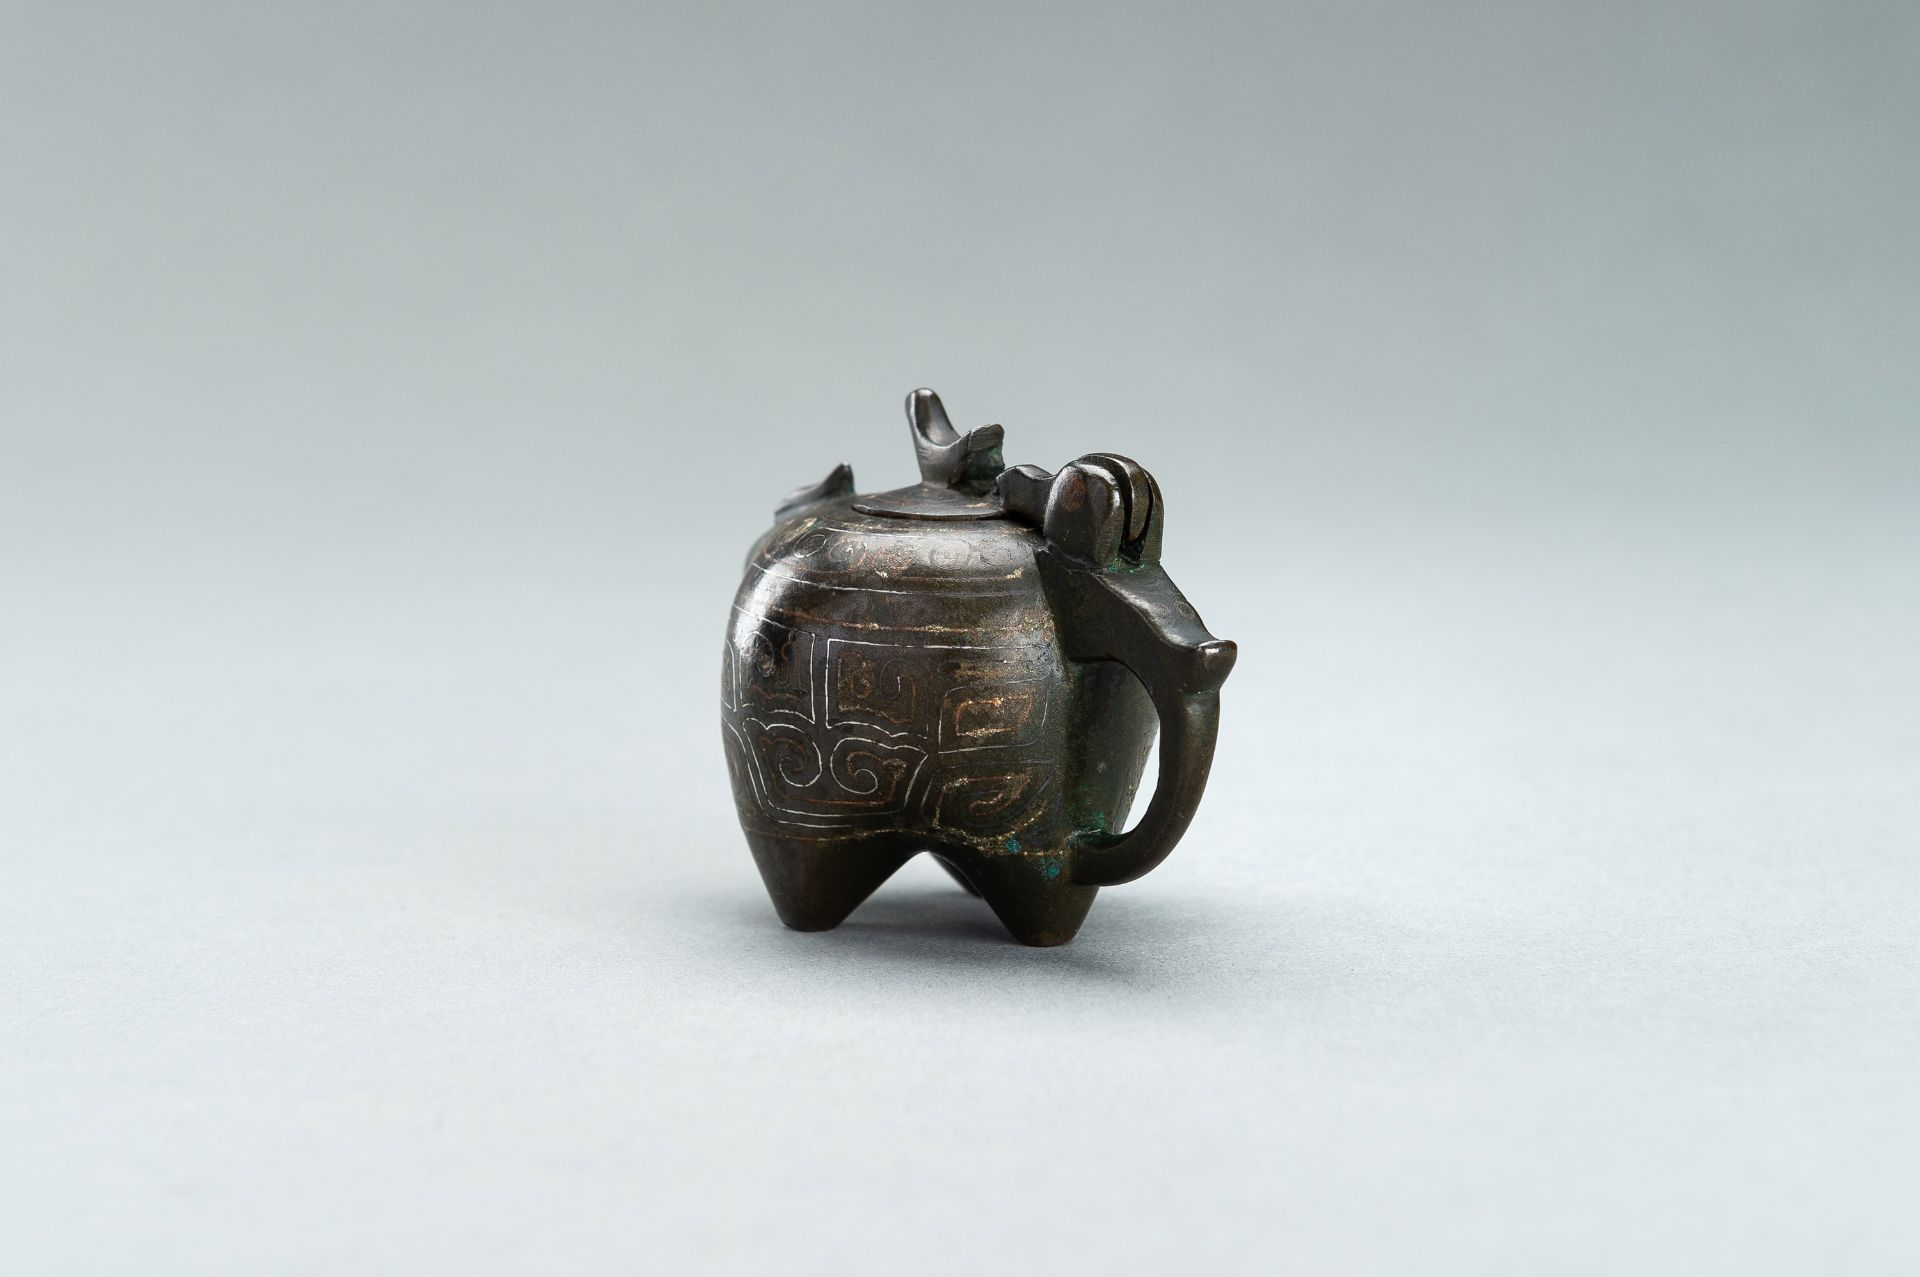 A SMALL COPPER AND SILVER INLAID BRONZE POURING TRIPOD VESSEL IN THE FORM OF AN ANIMAL, 17TH CENTURY - Image 7 of 11